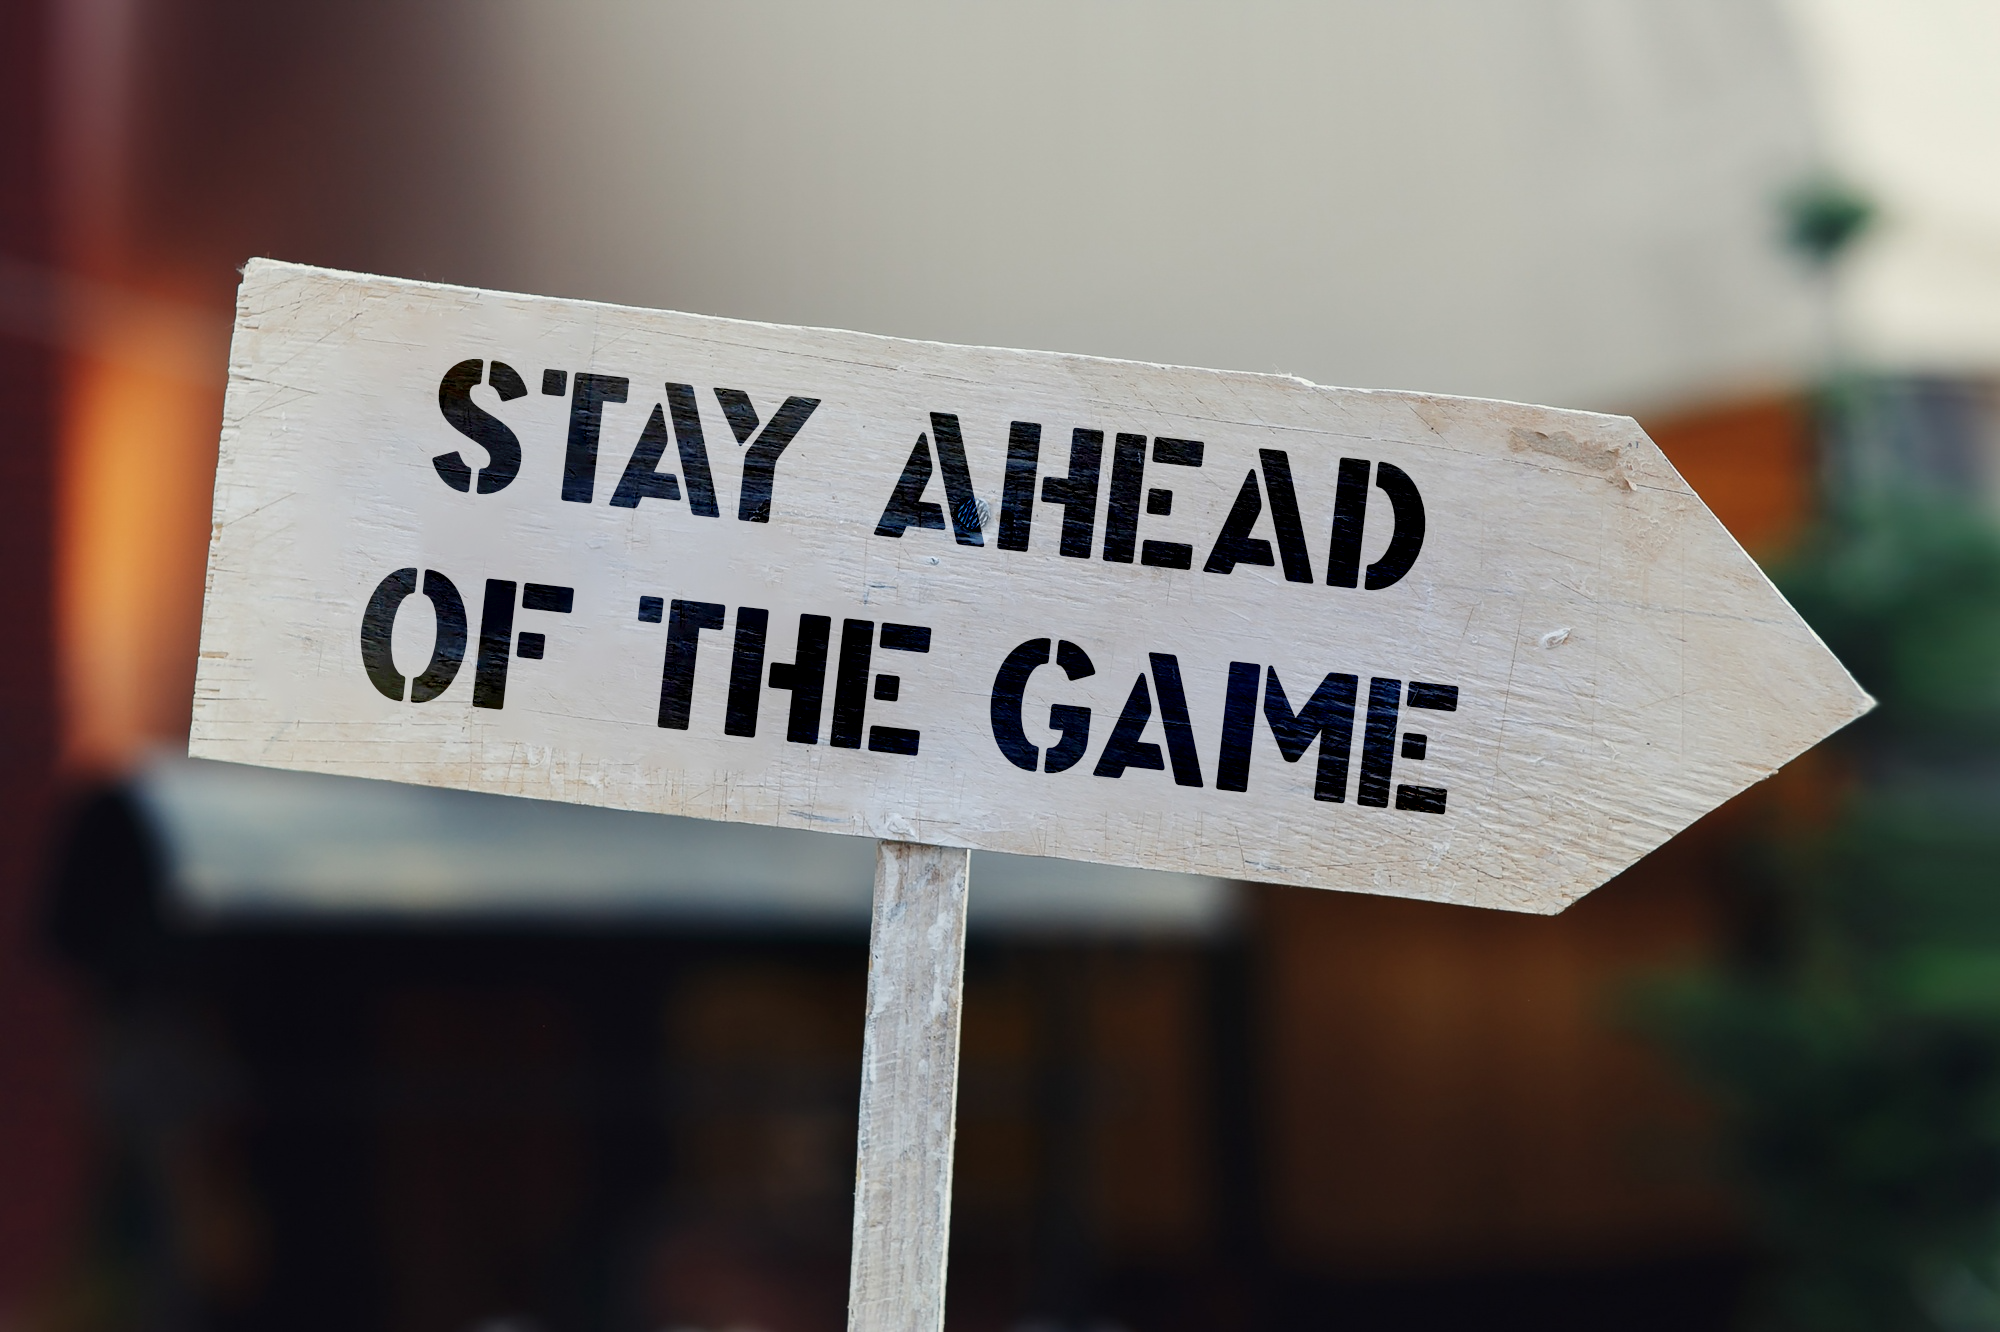 An image of a sign with the text "stay ahead of the game"